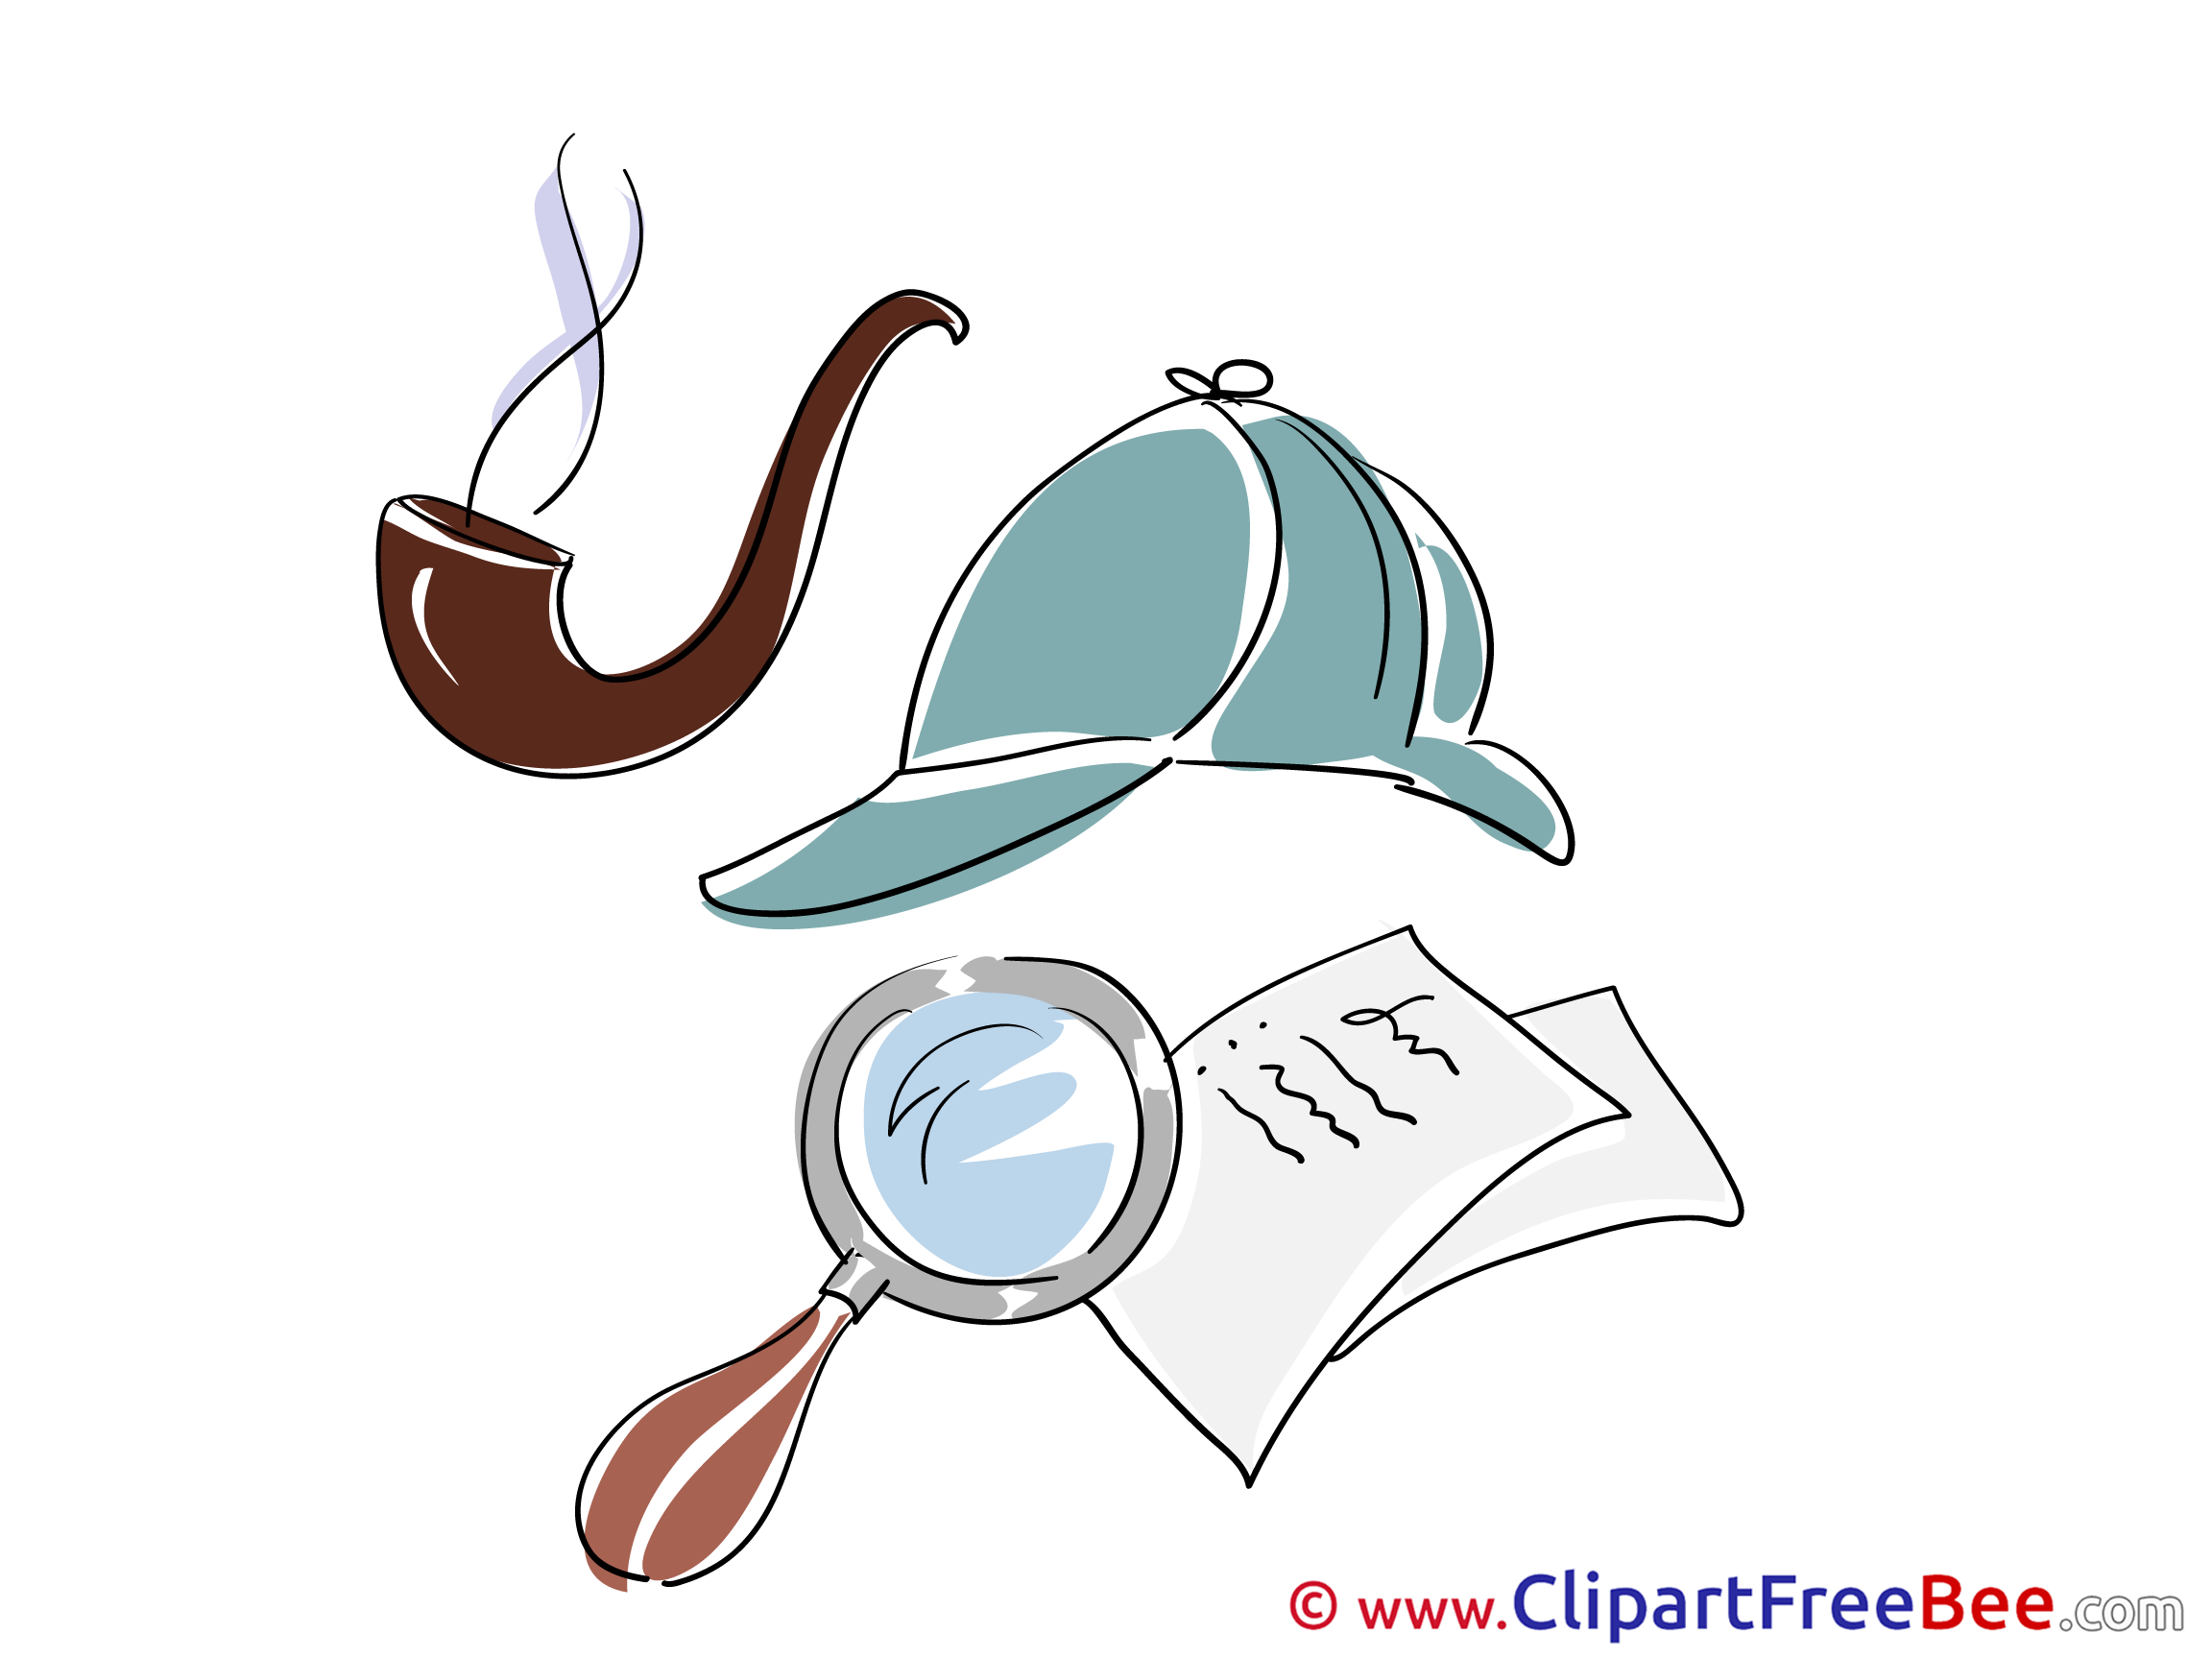 Pipe Loupe Cap Text Clues free Cliparts for download